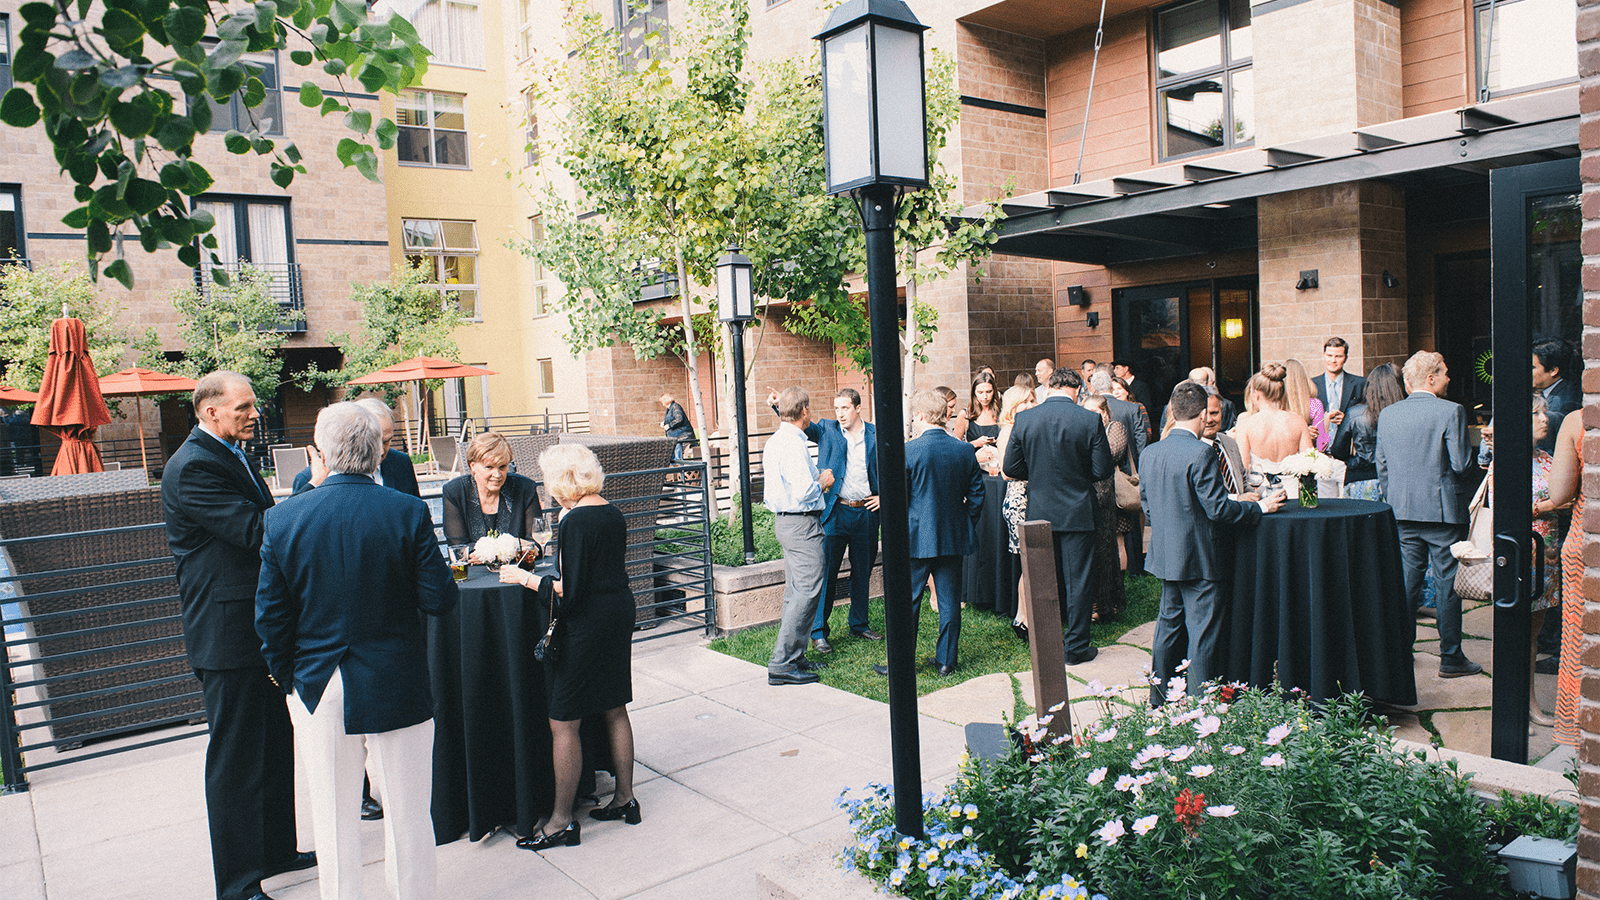 Guests gather after a the wedding in the Limelight Aspen yard, on a summer day